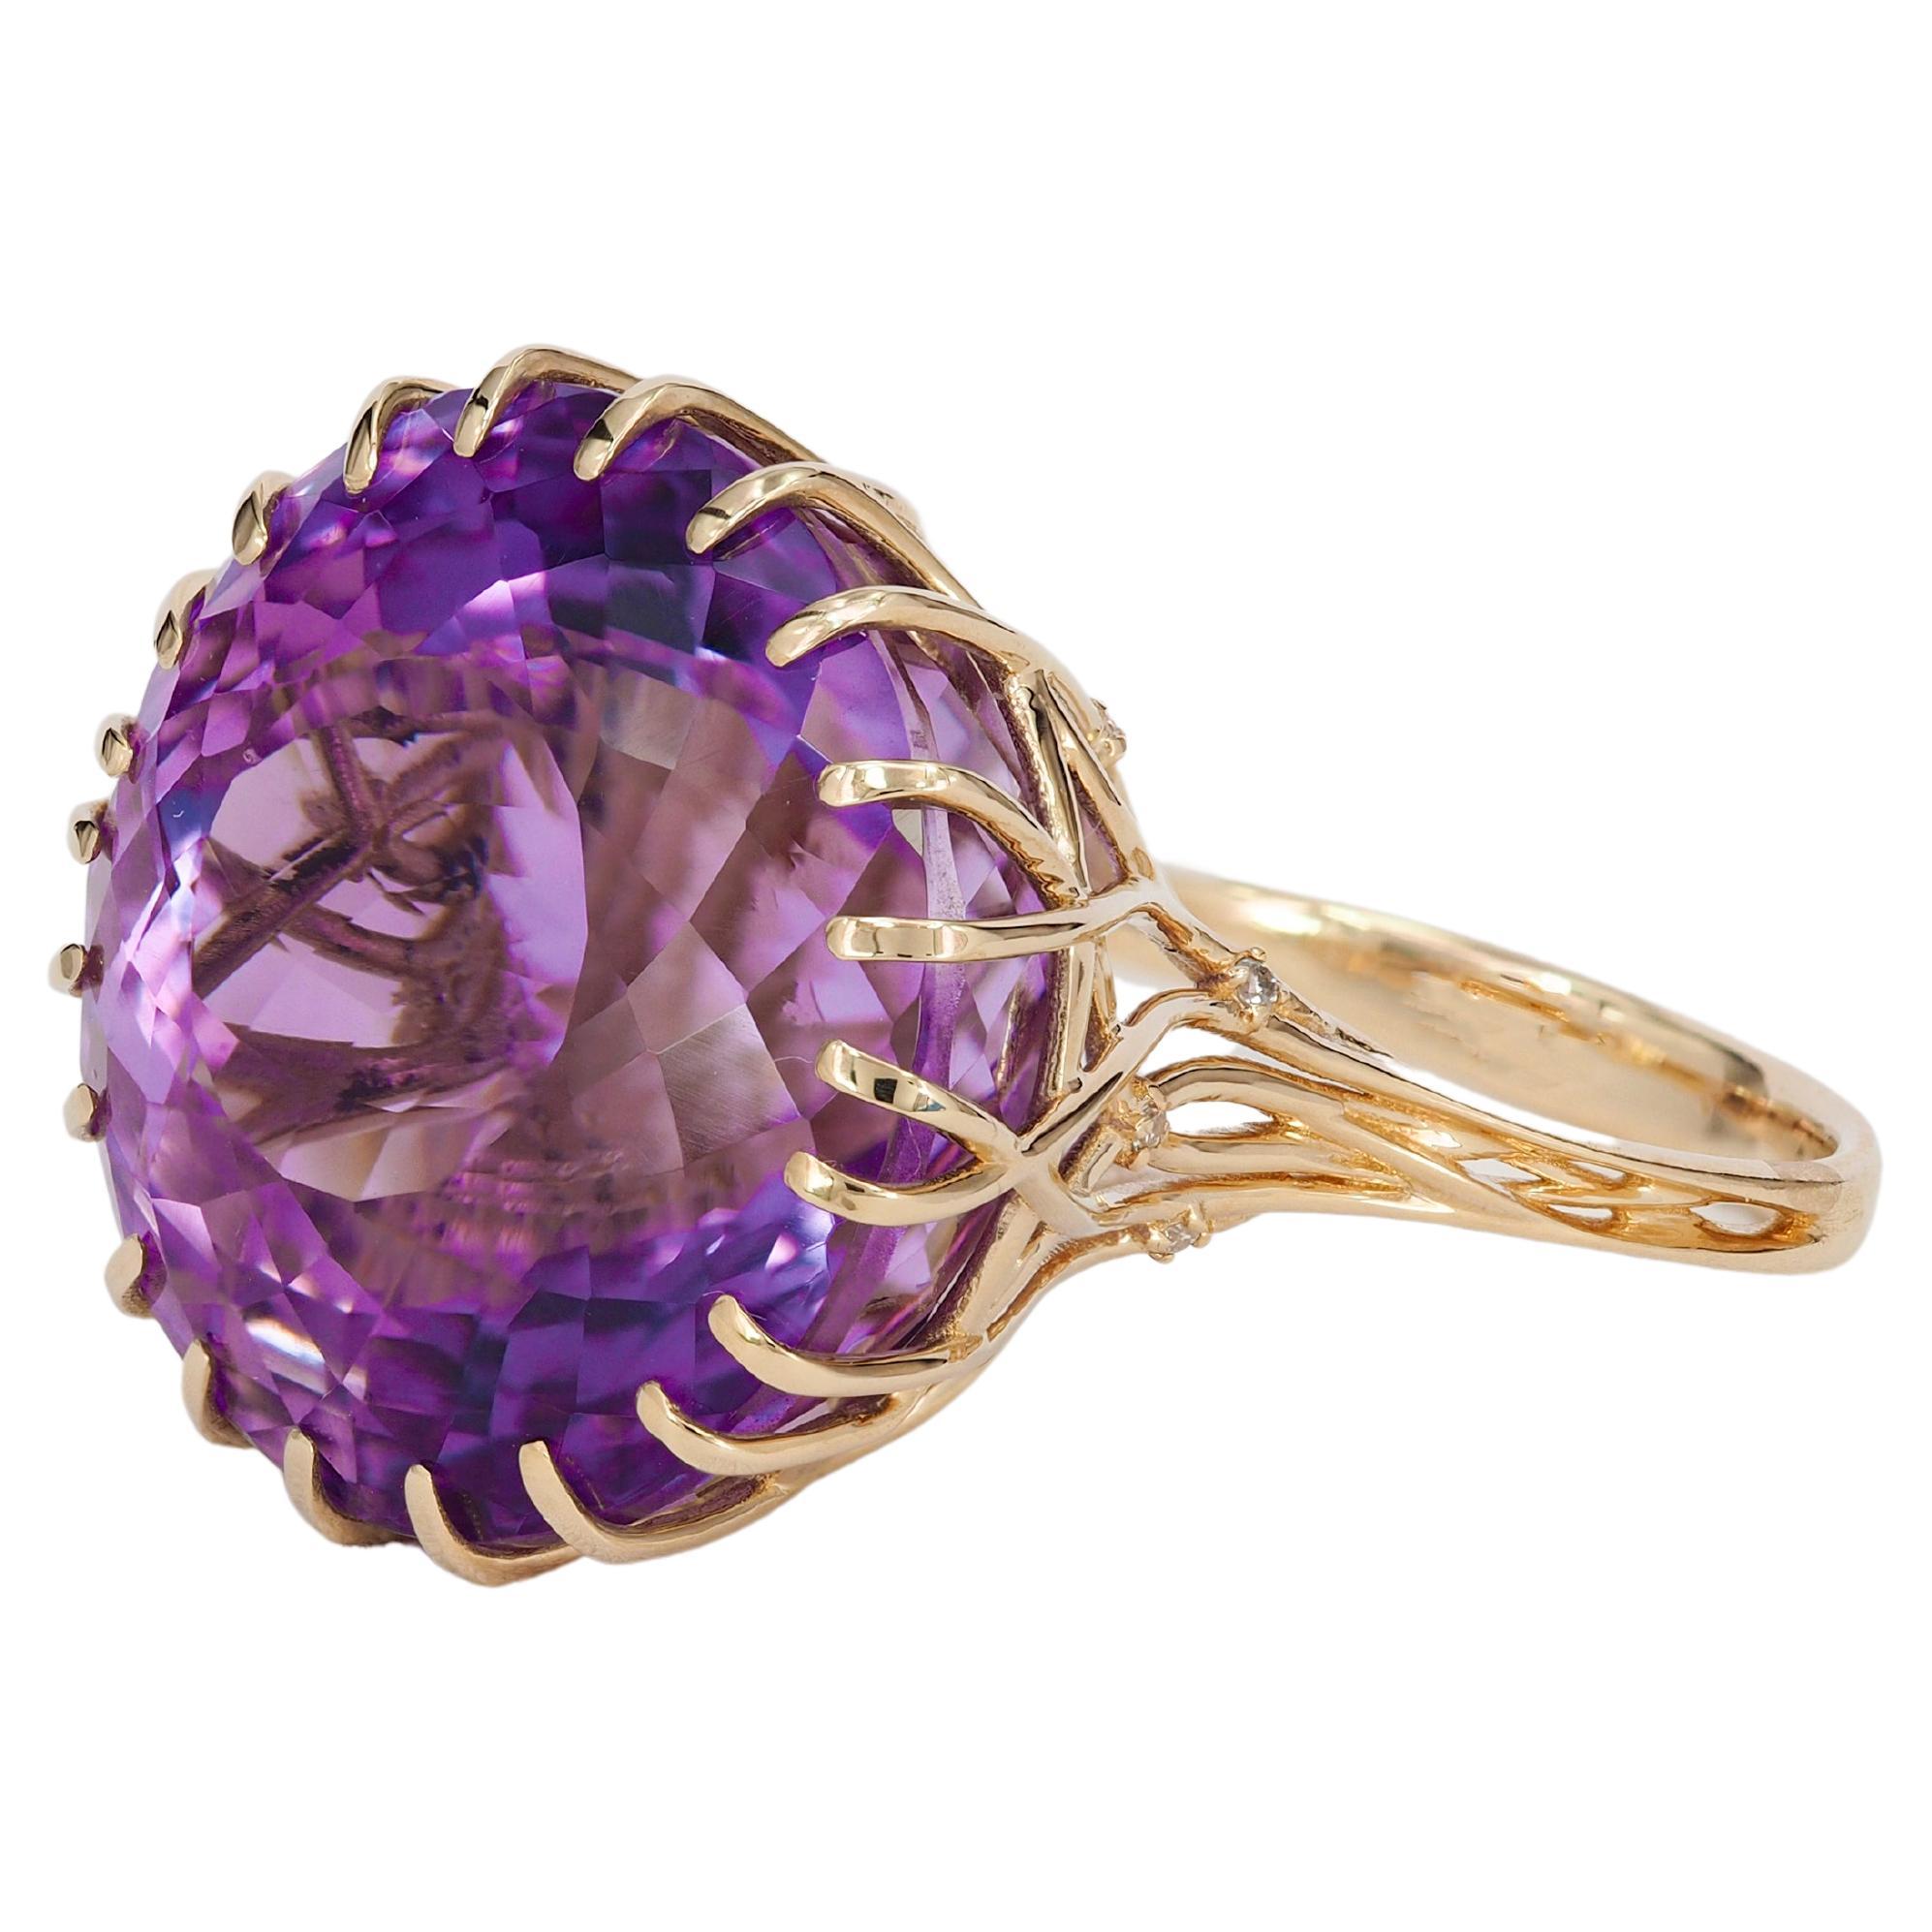 For Sale:  14 Karat Solid Gold Cocktail Ring with Natural Amethyst and Diamonds